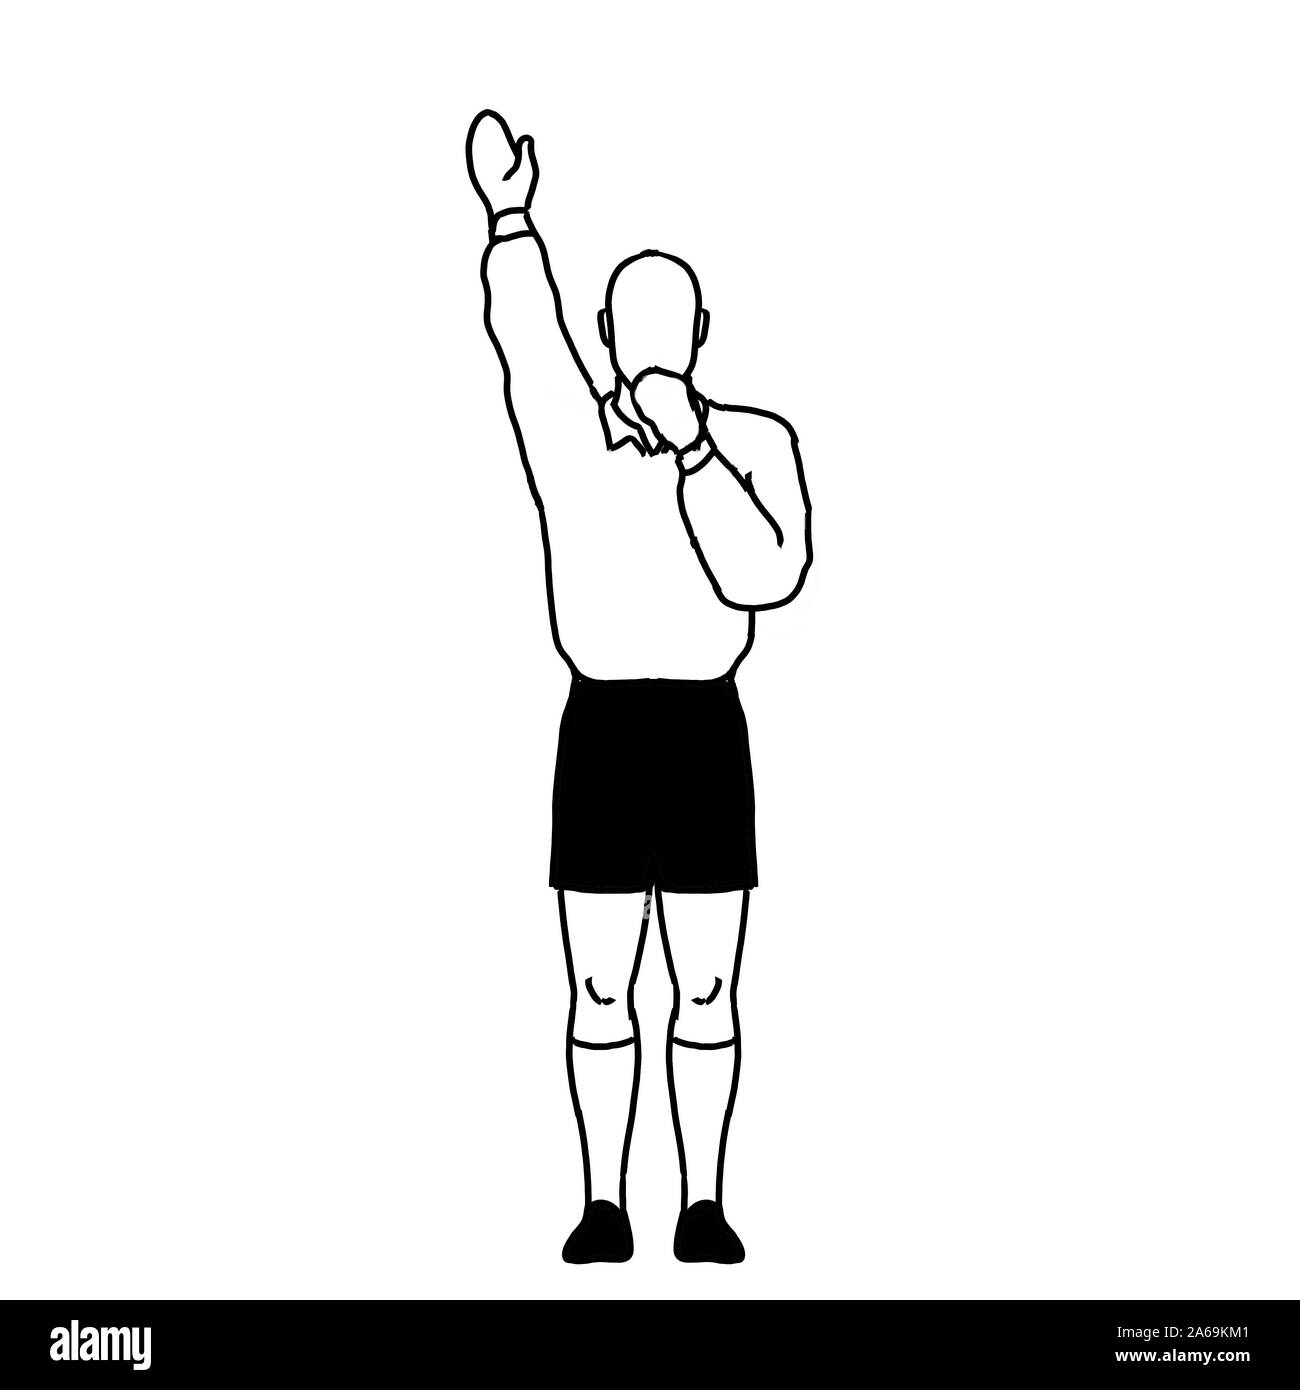 Retro style line drawing illustration showing a rugby referee with penalty try hand signal on isolated background in black and white. Stock Photo